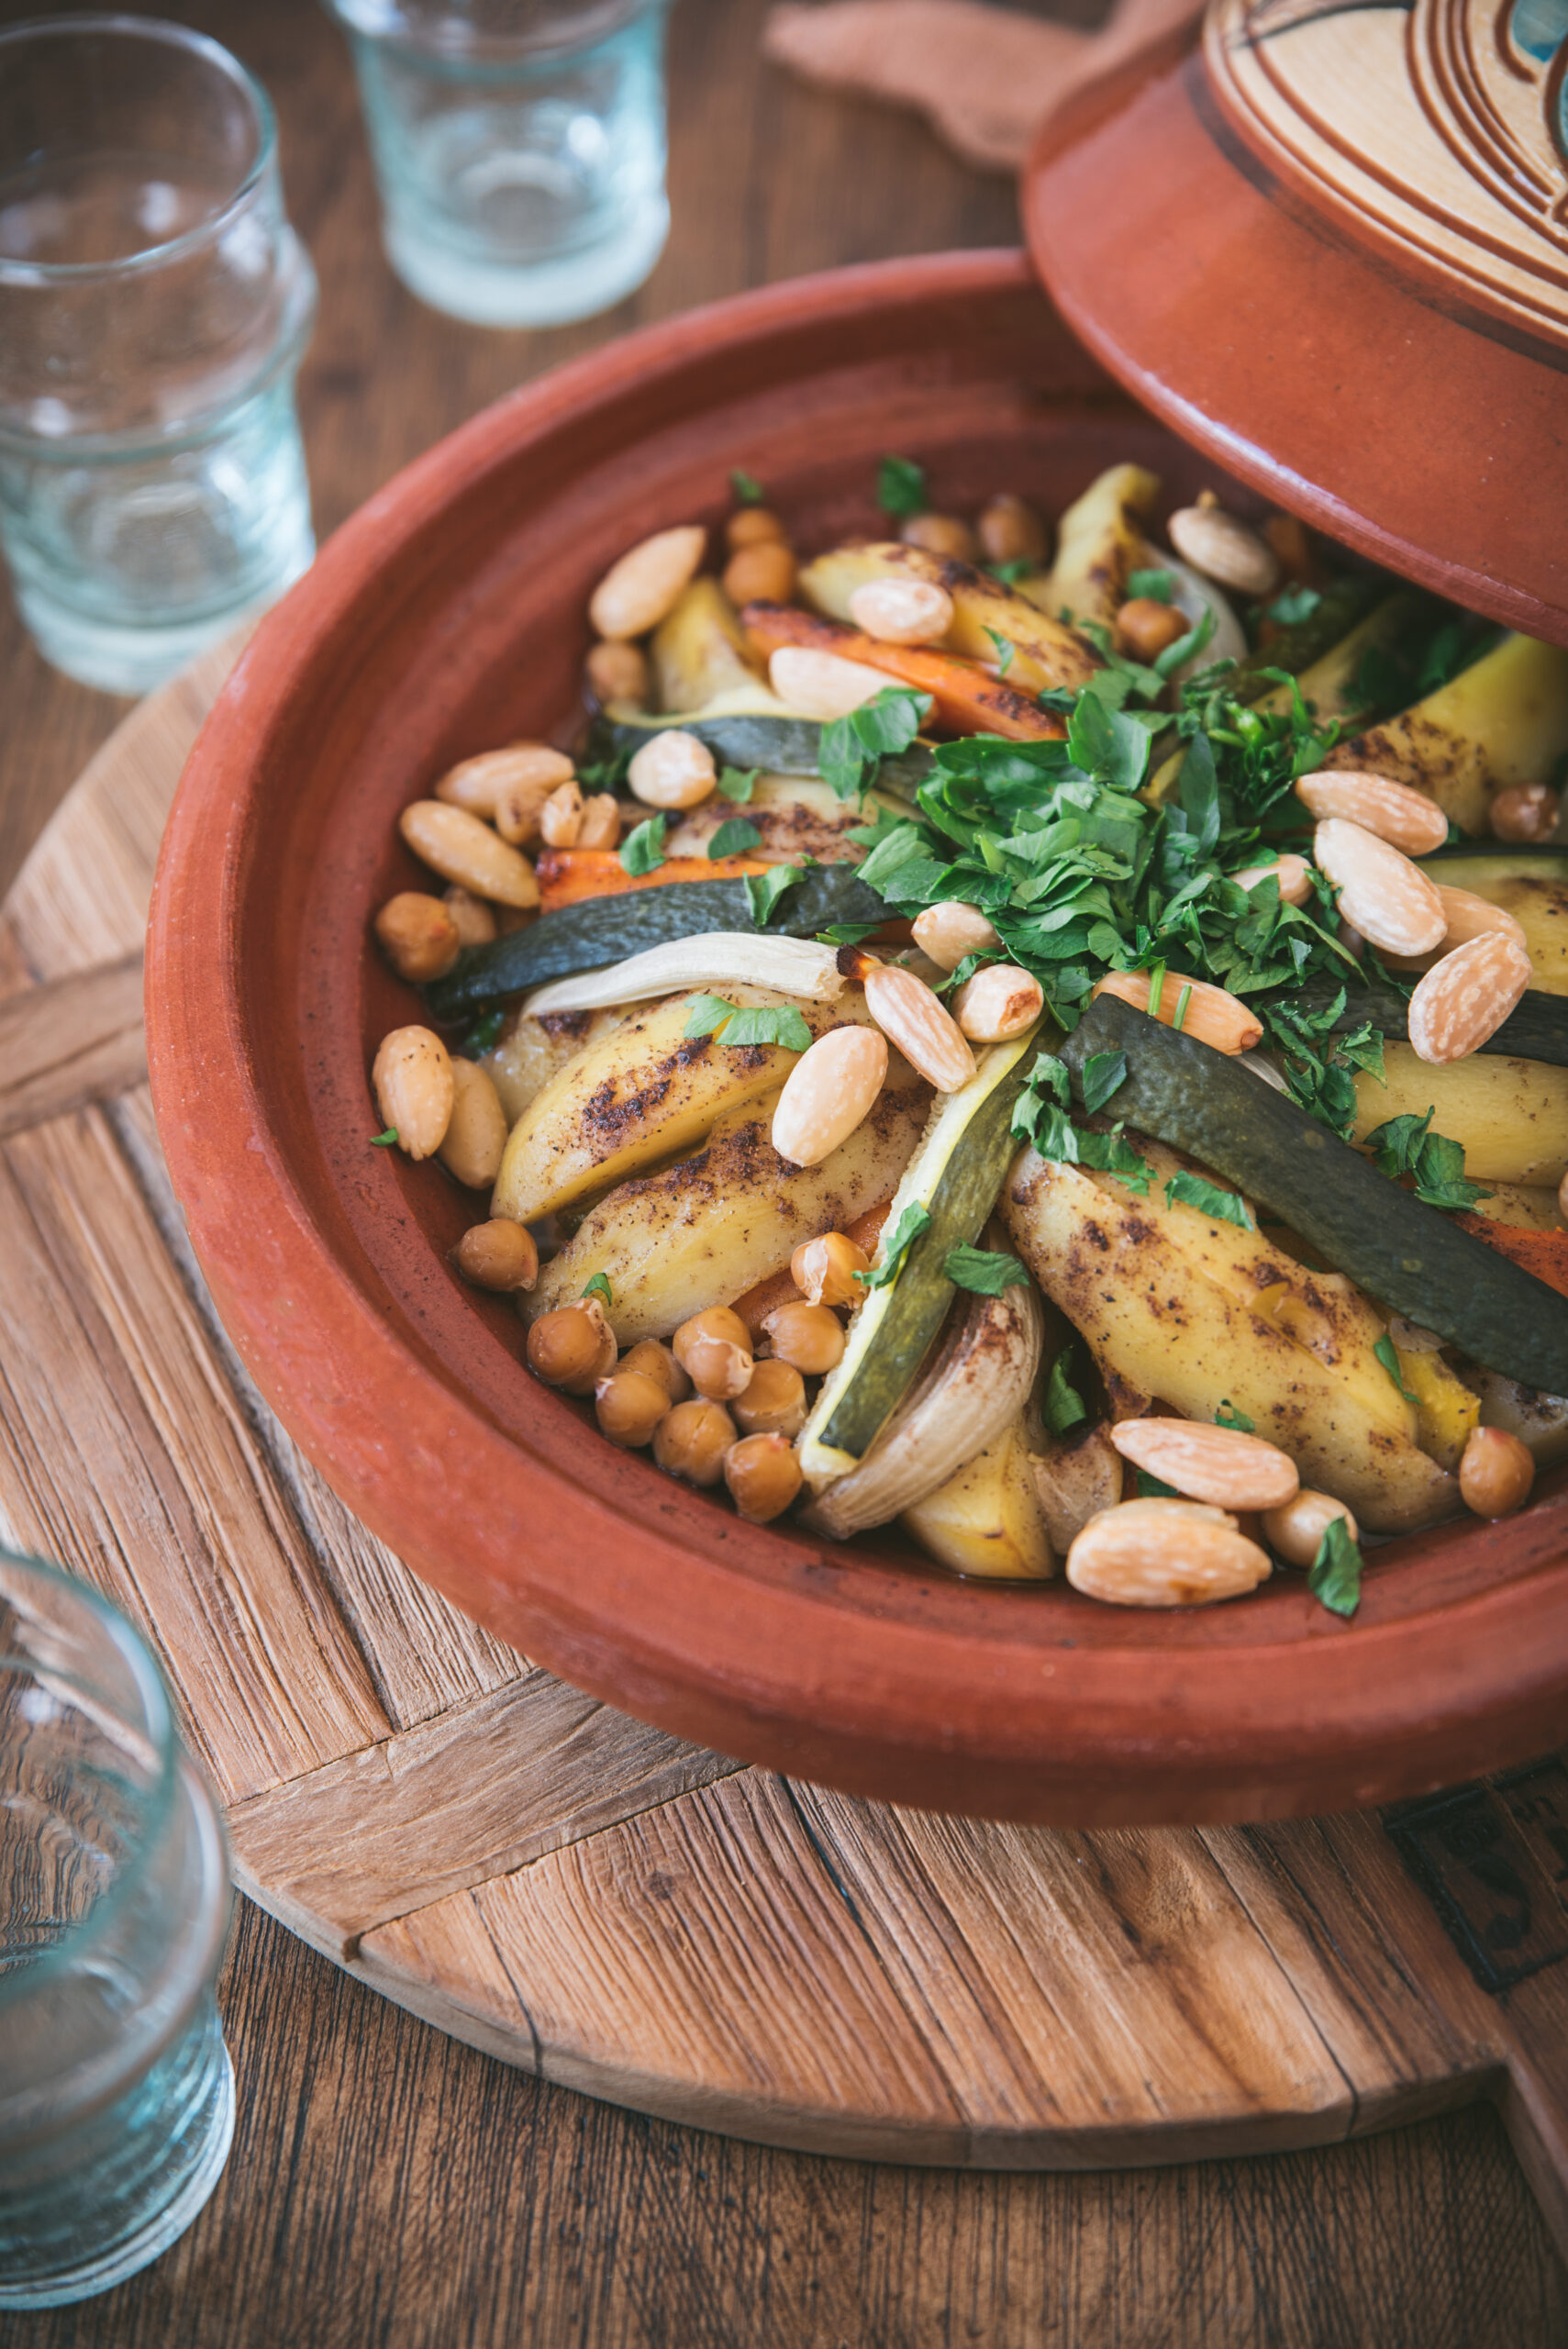 Vegetarian Tagine Recipe with Vegetables